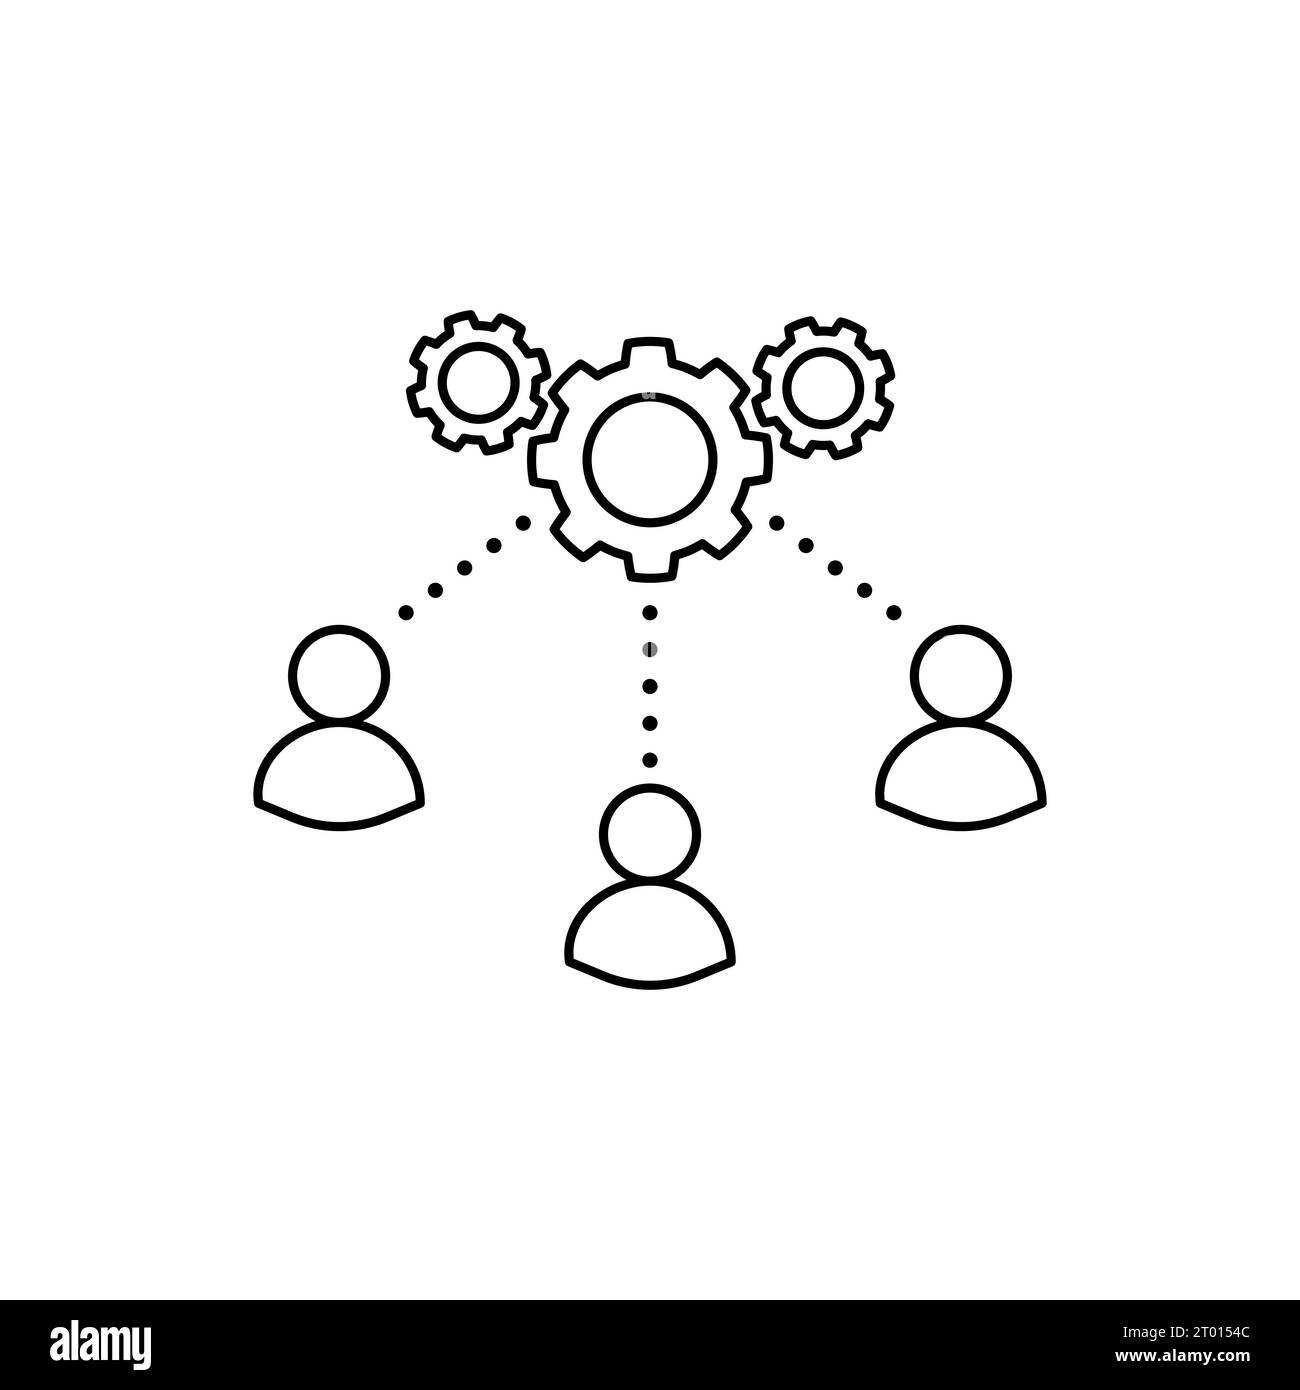 Team of some employees, workers, or humans attached via a dots to a ratchet wheel, graphical appearance for leader management icon Stock Vector